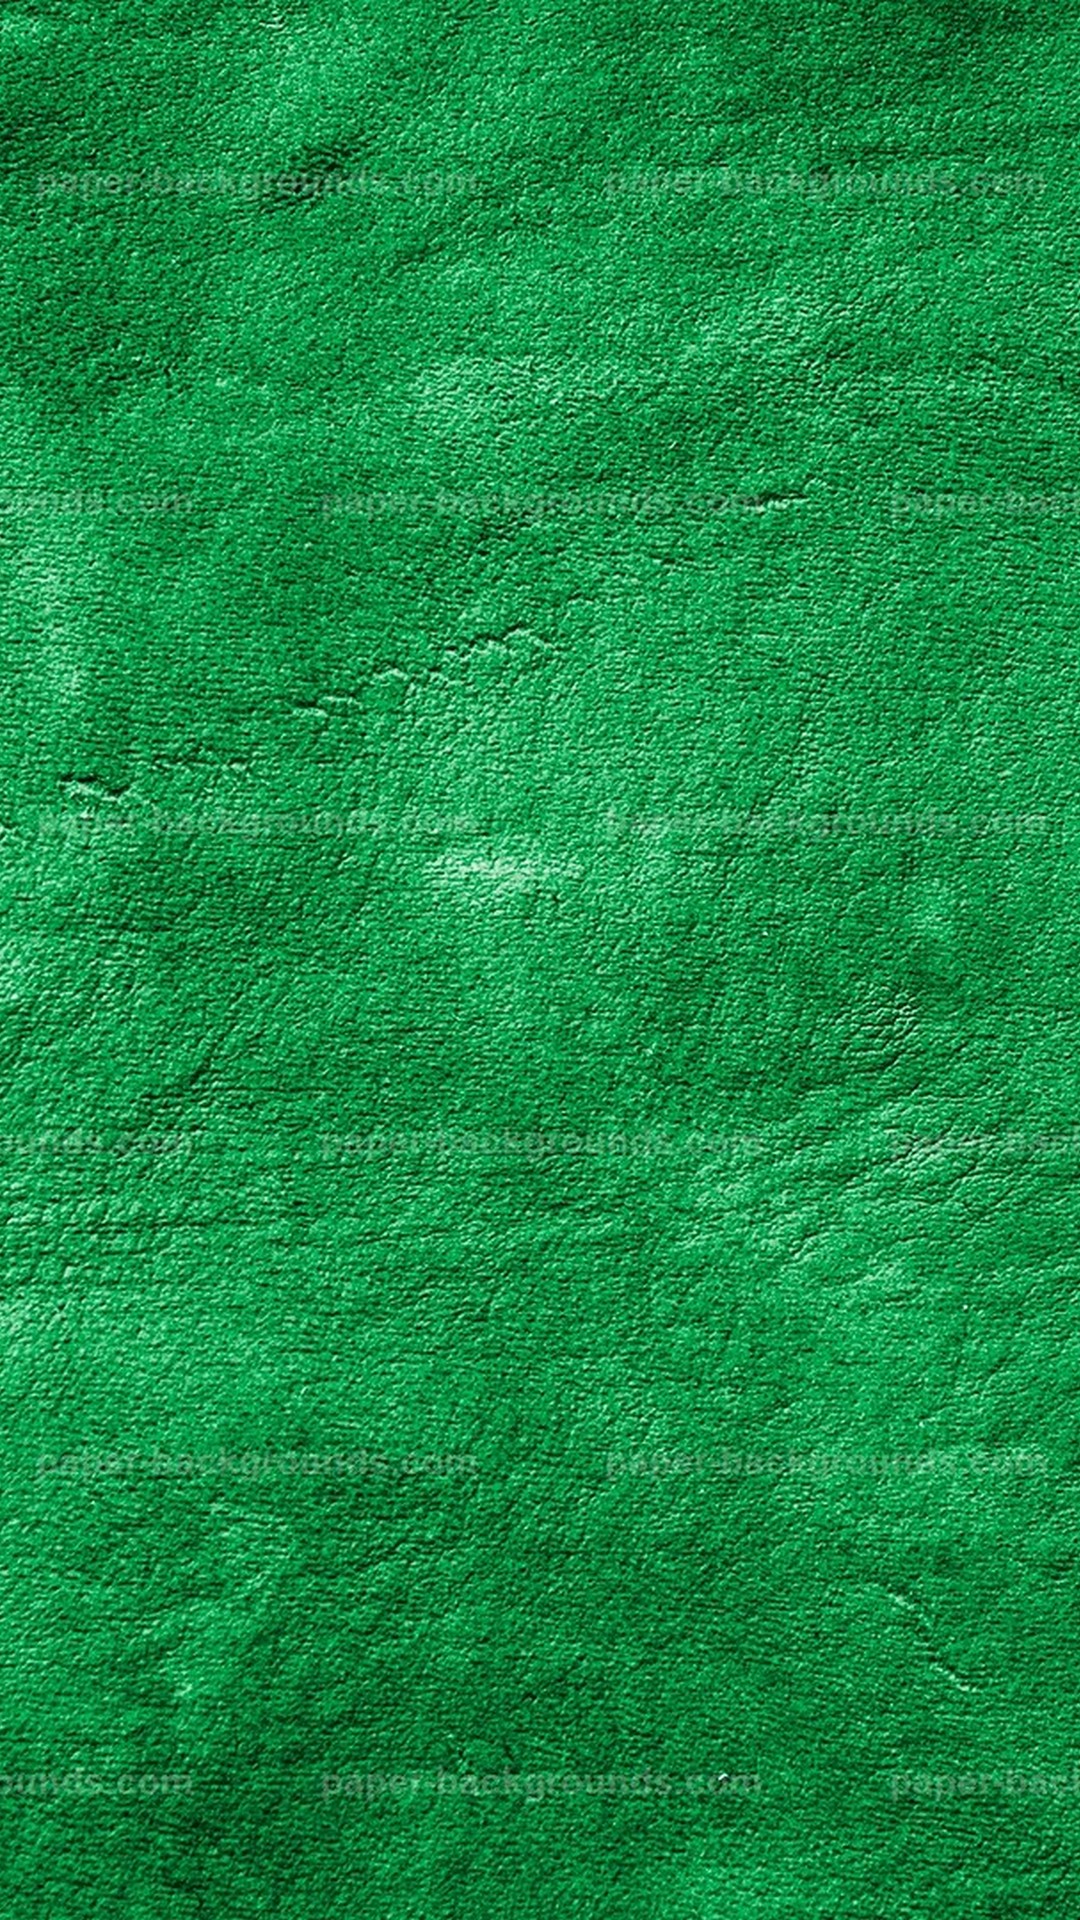 Android Wallpaper HD Emerald Green with resolution 1080X1920 pixel. You can make this wallpaper for your Android backgrounds, Tablet, Smartphones Screensavers and Mobile Phone Lock Screen